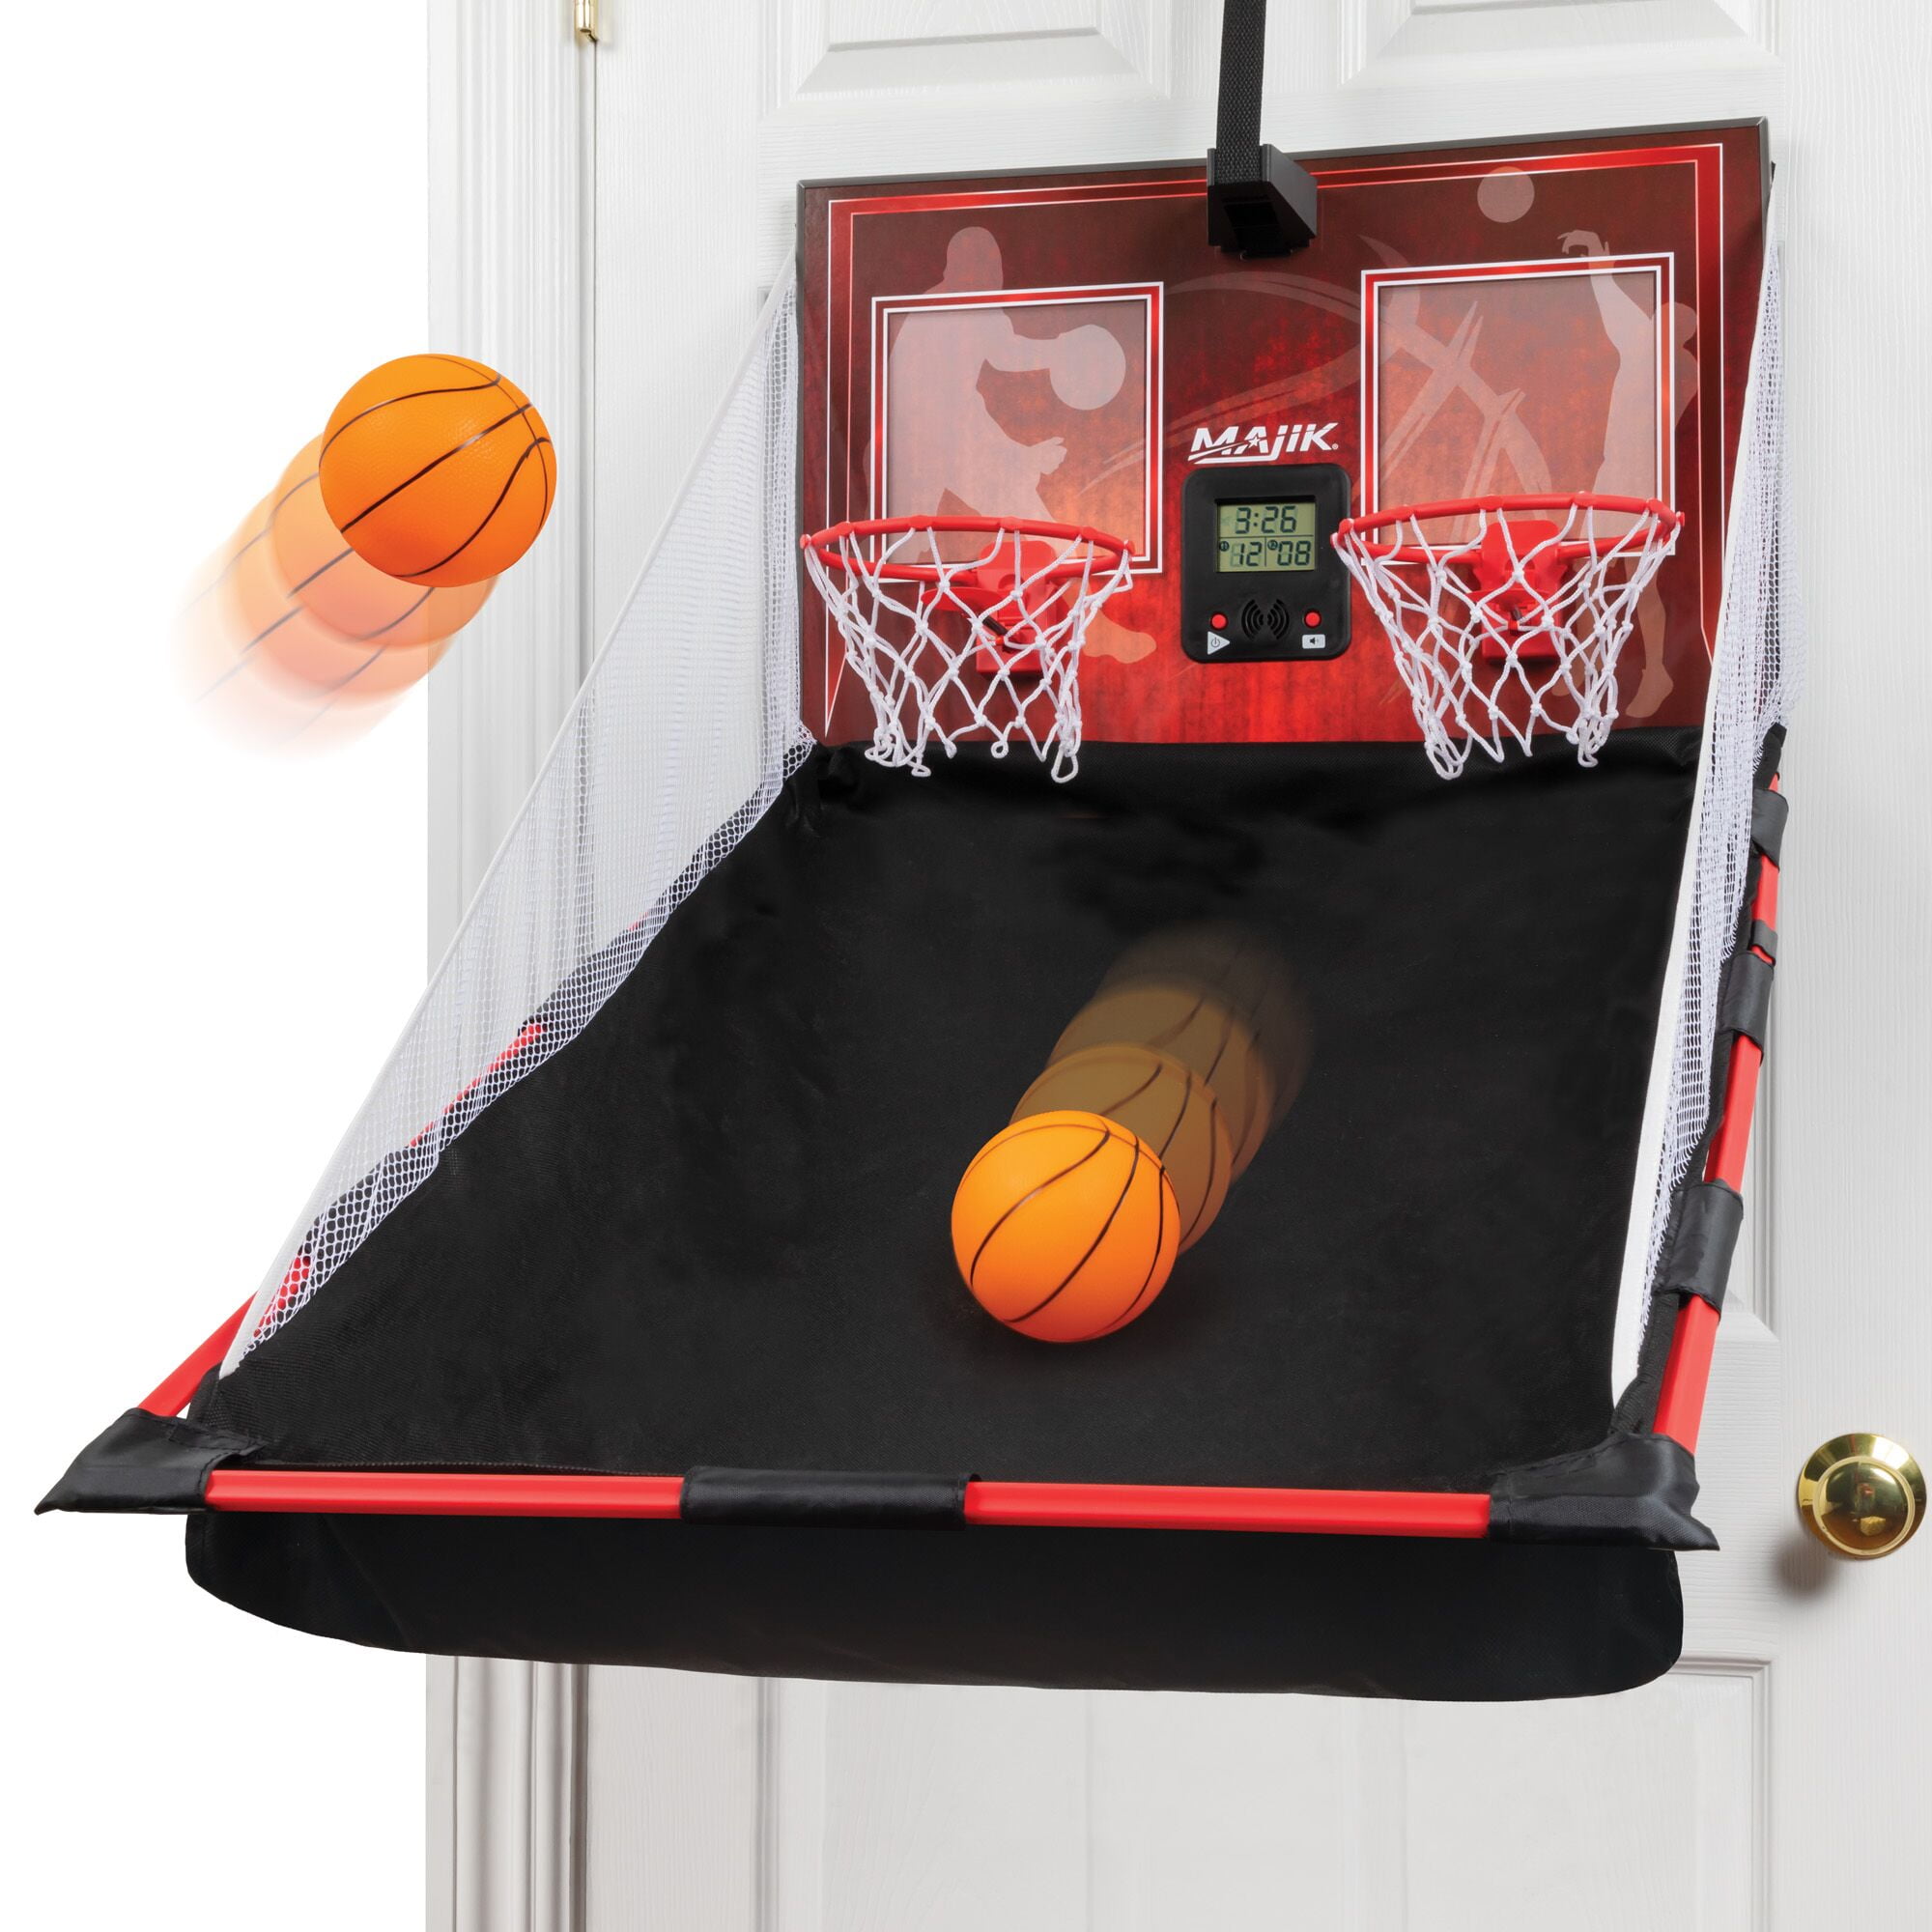 Rec-Tek Deluxe Over The Door Basketball Hoop Game for Kids Complete with All Accessories No Tools Required Features Built-in Ball Holder